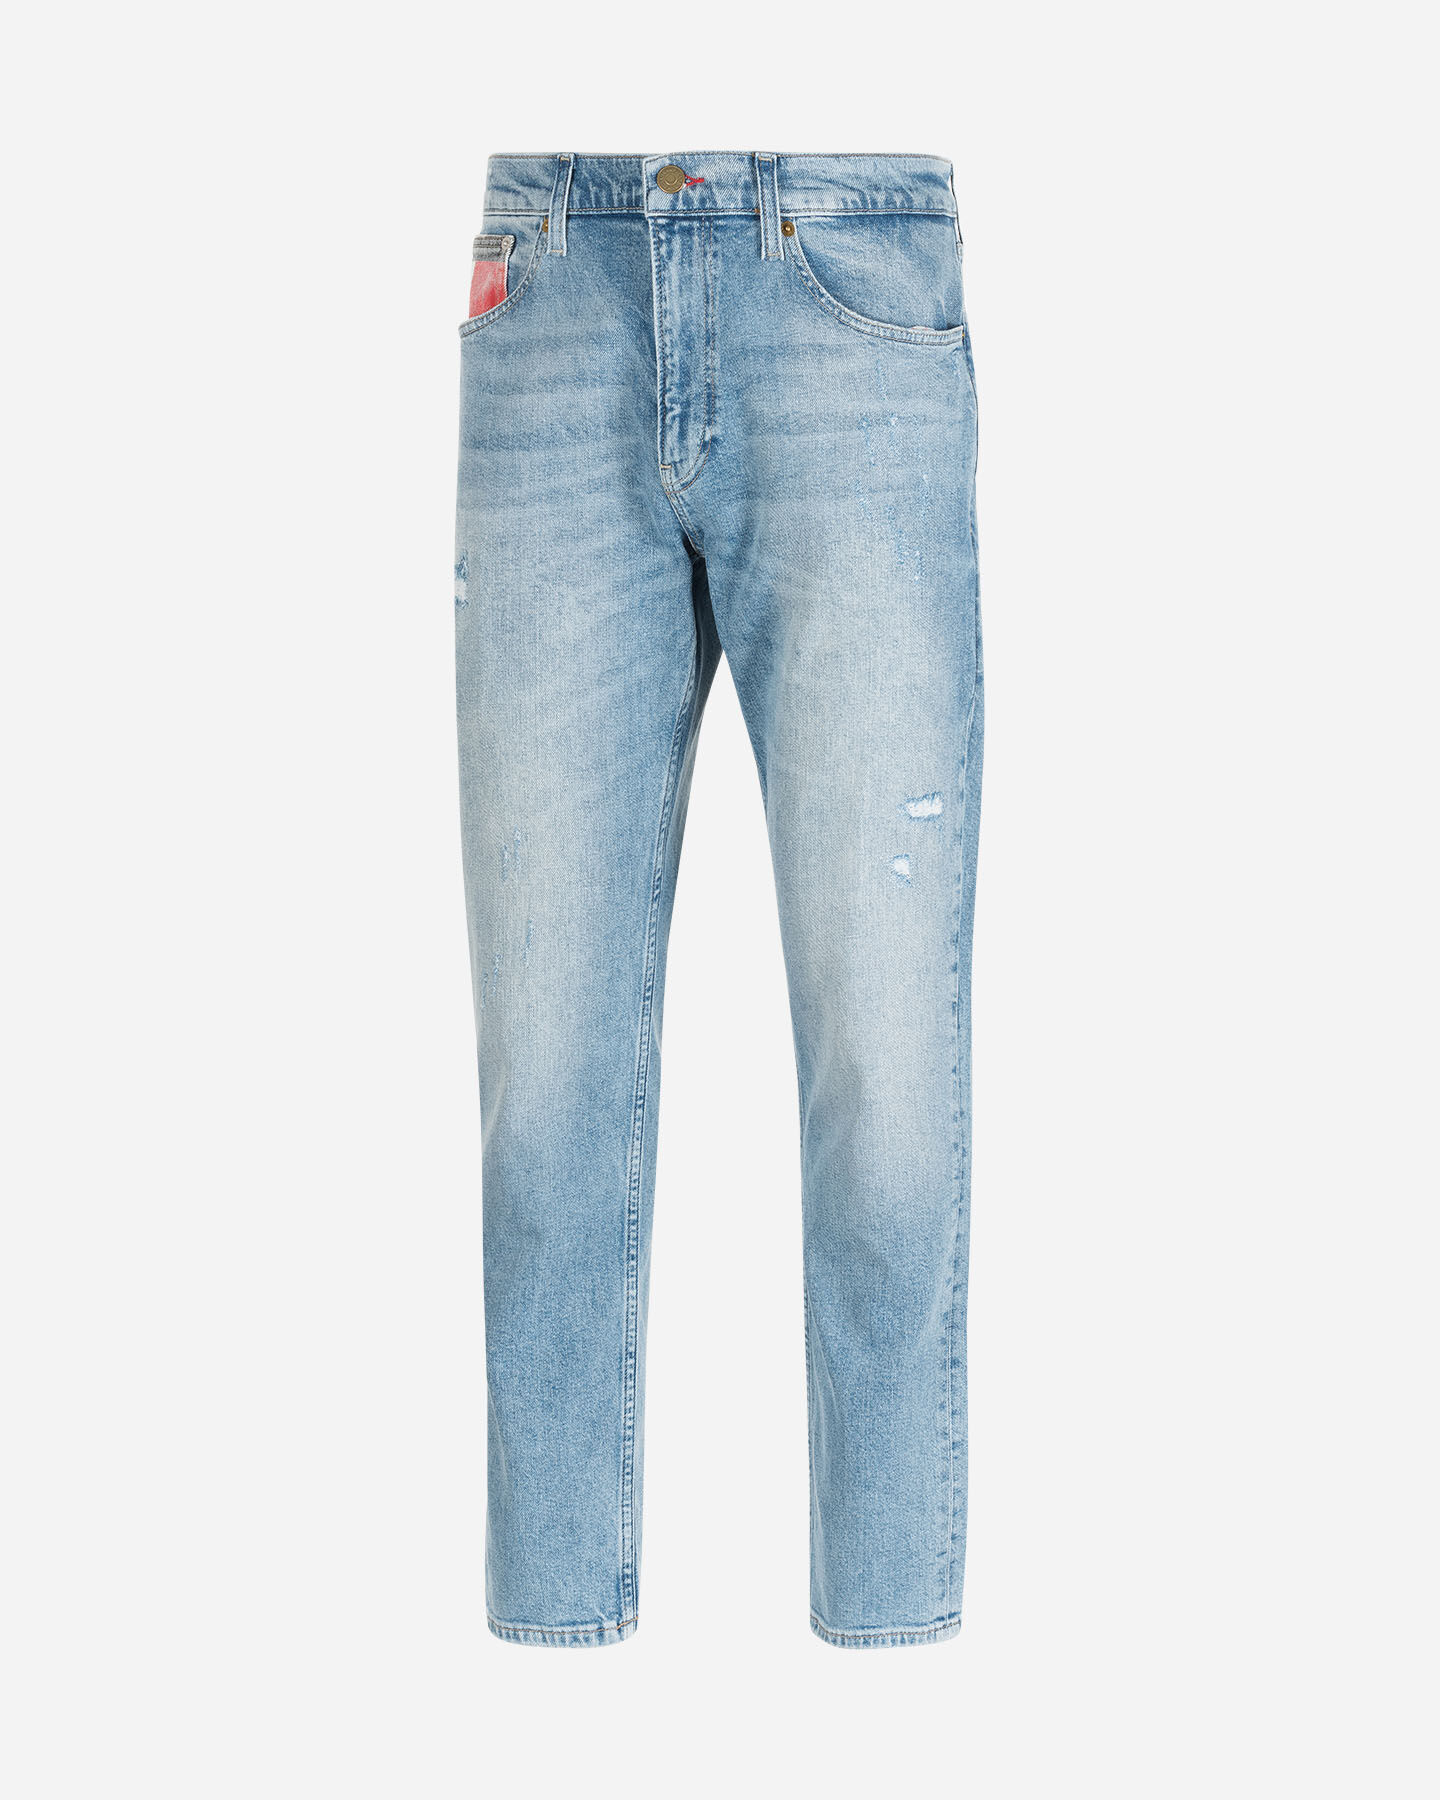  Jeans TOMMY HILFIGER REY M S4082067|1CE|28 scatto 3